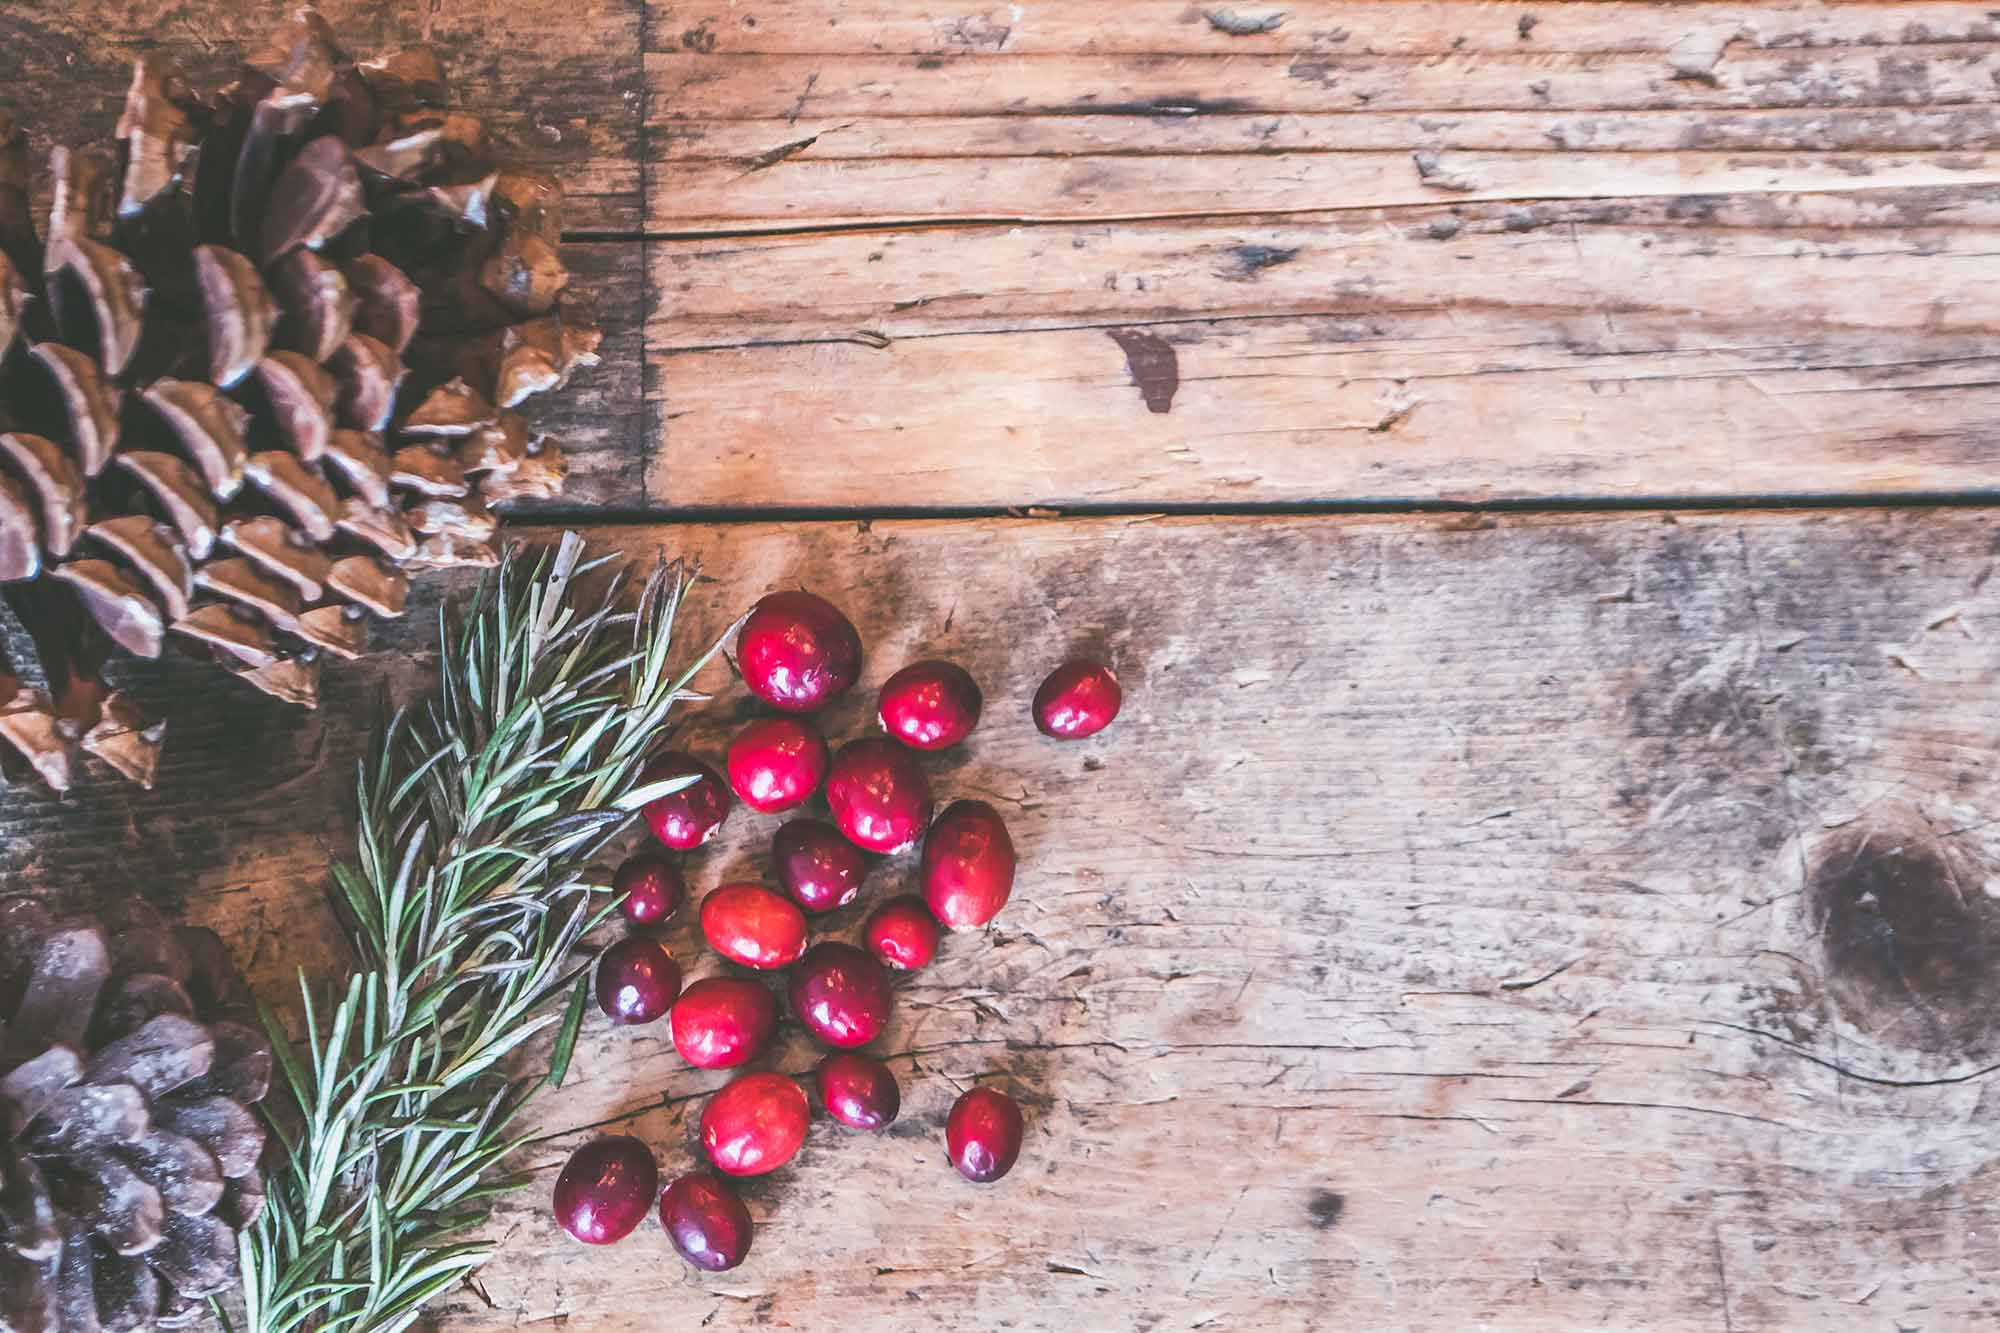 Design for Conscious Living - Go Green for the Holidays - Red fruits on Table - Photo by Jessica Lewis from Pexels